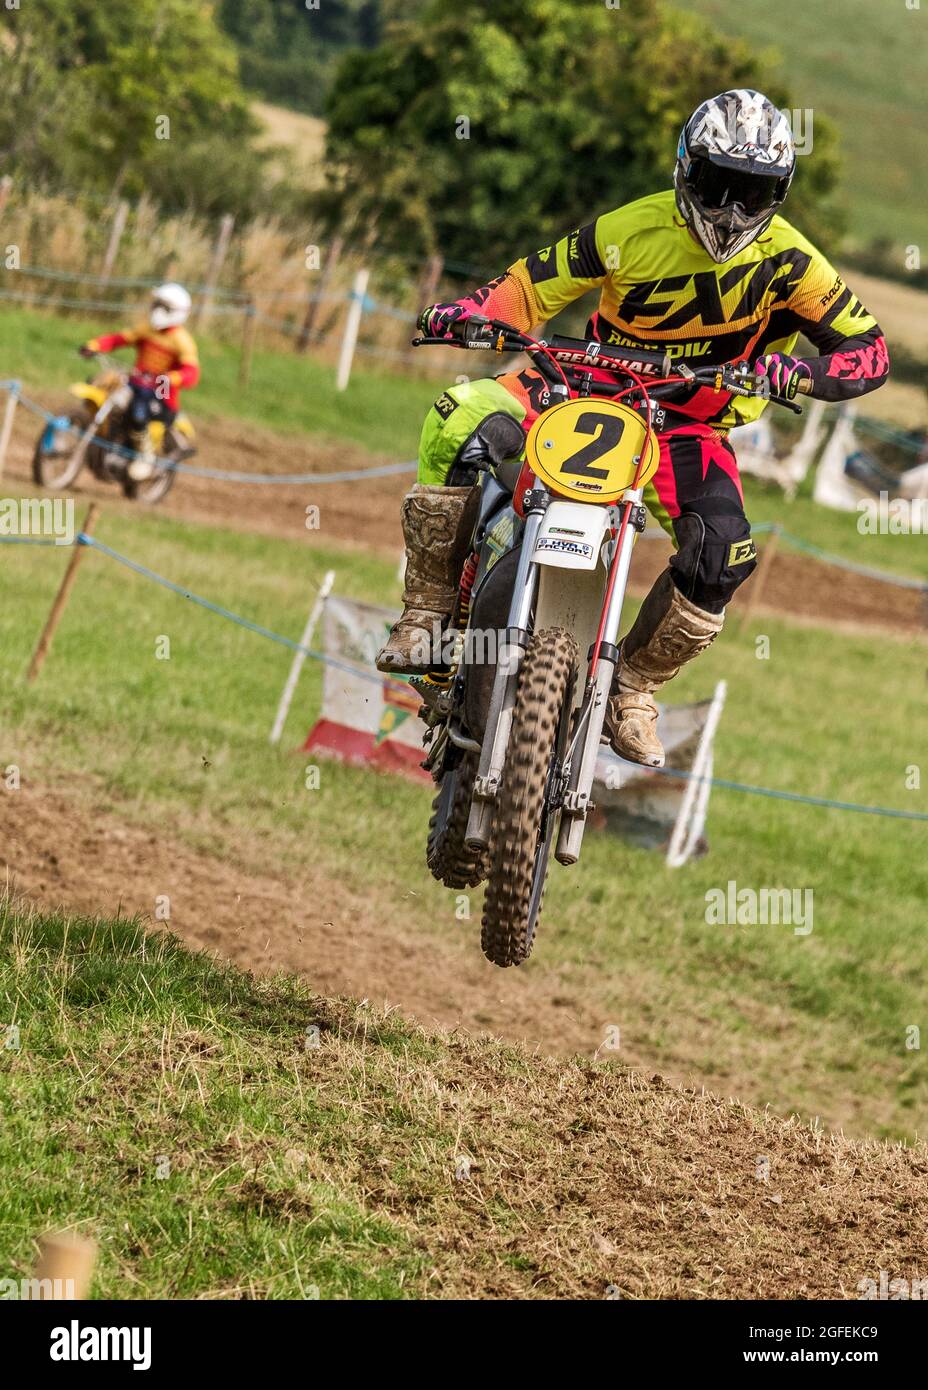 Motorcycle Racing Association Ireland Charity Classic moto-X, Ballyslagh, County Down, Irlande du Nord, 13/14 août 2021 Banque D'Images